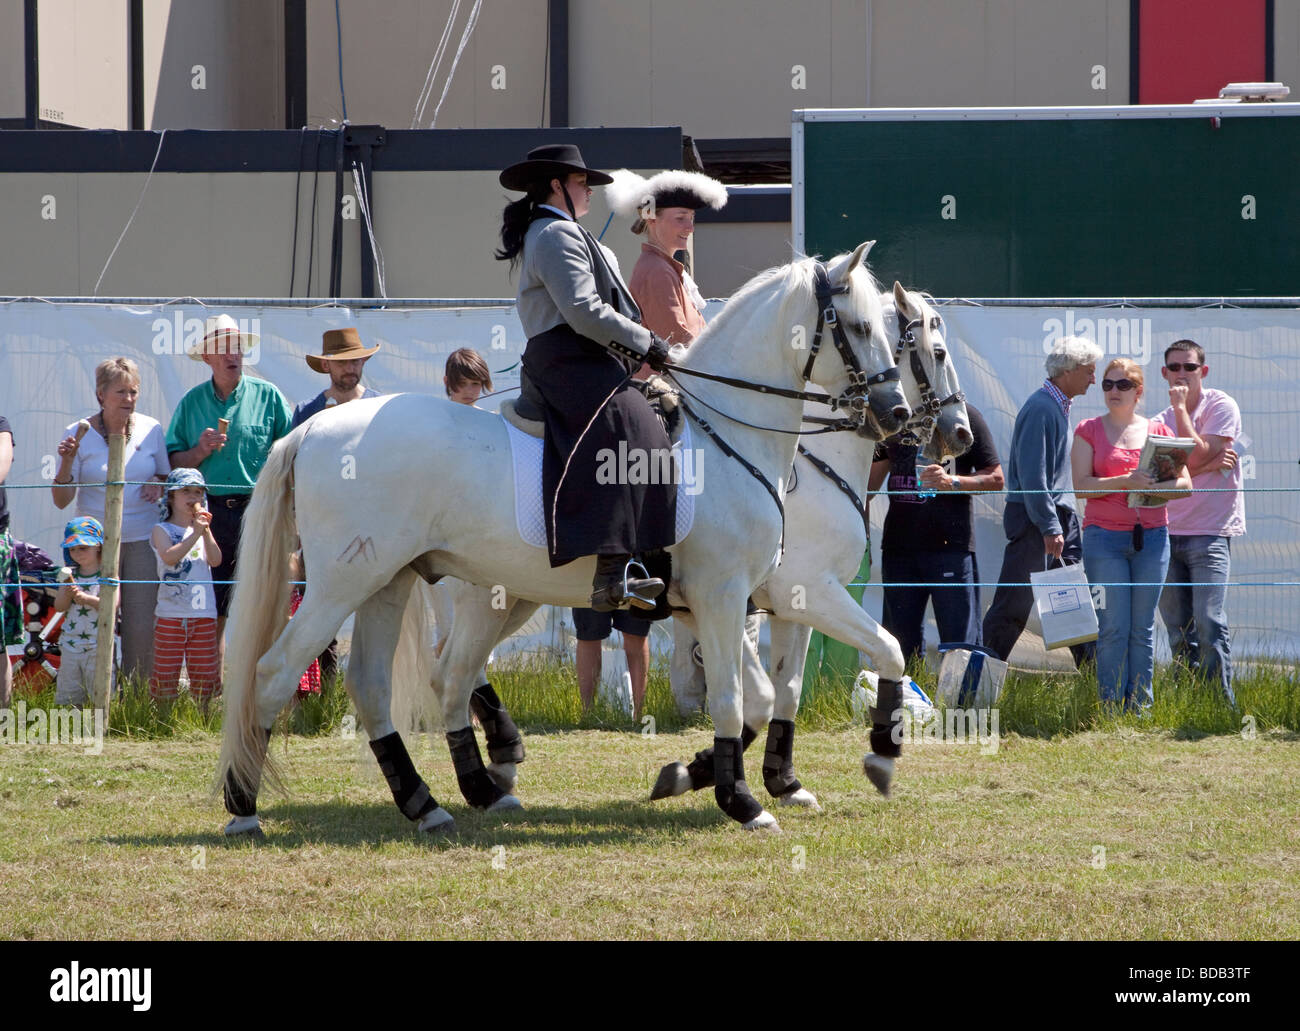 Two Lusitano horses doing a dressage demonstration at Hay on Wye Literary Festival Stock Photo